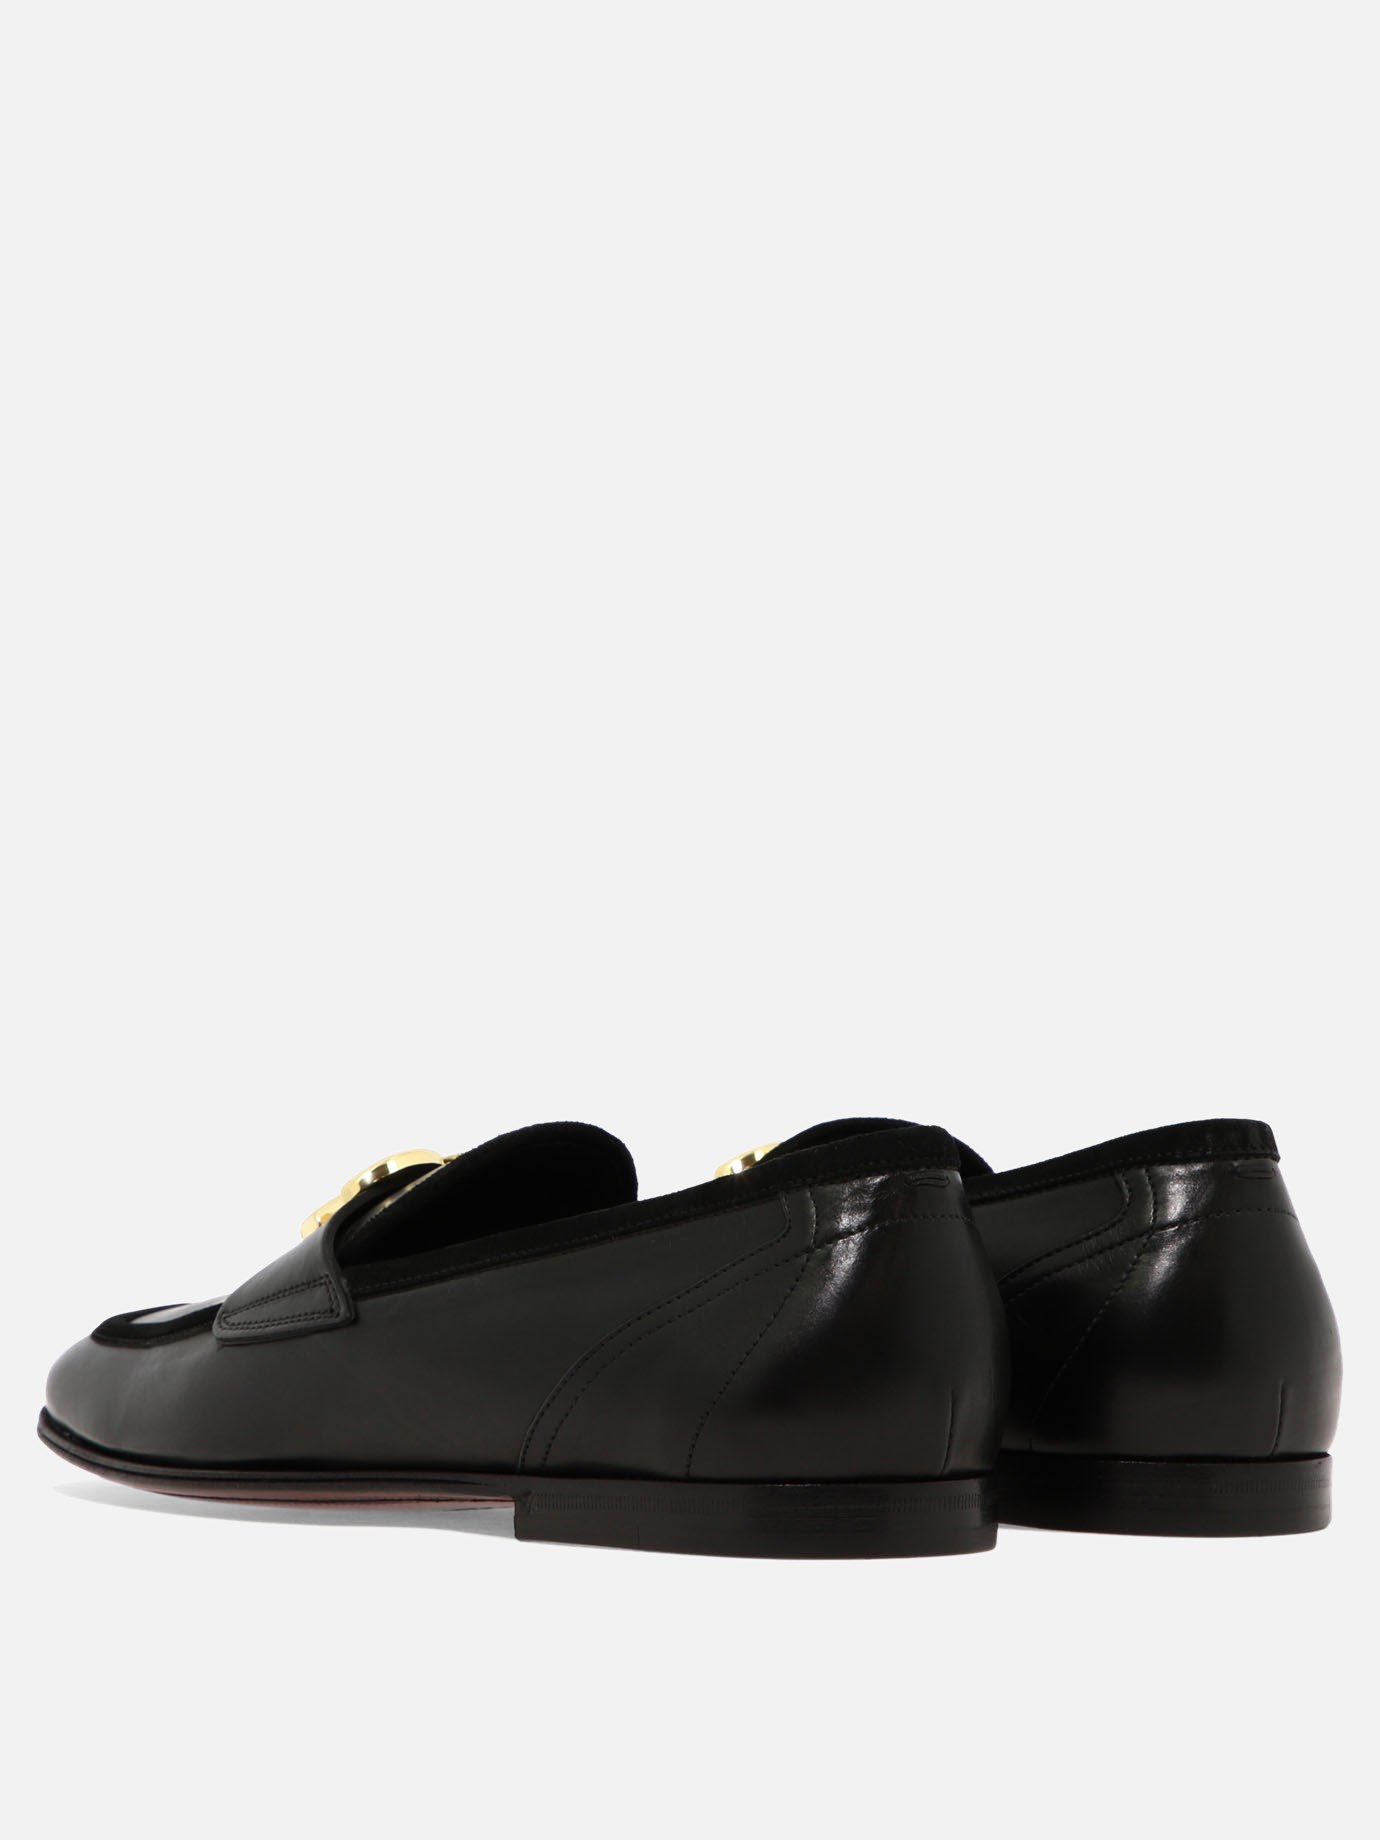  Ariosto  loafers by Dolce & Gabbana